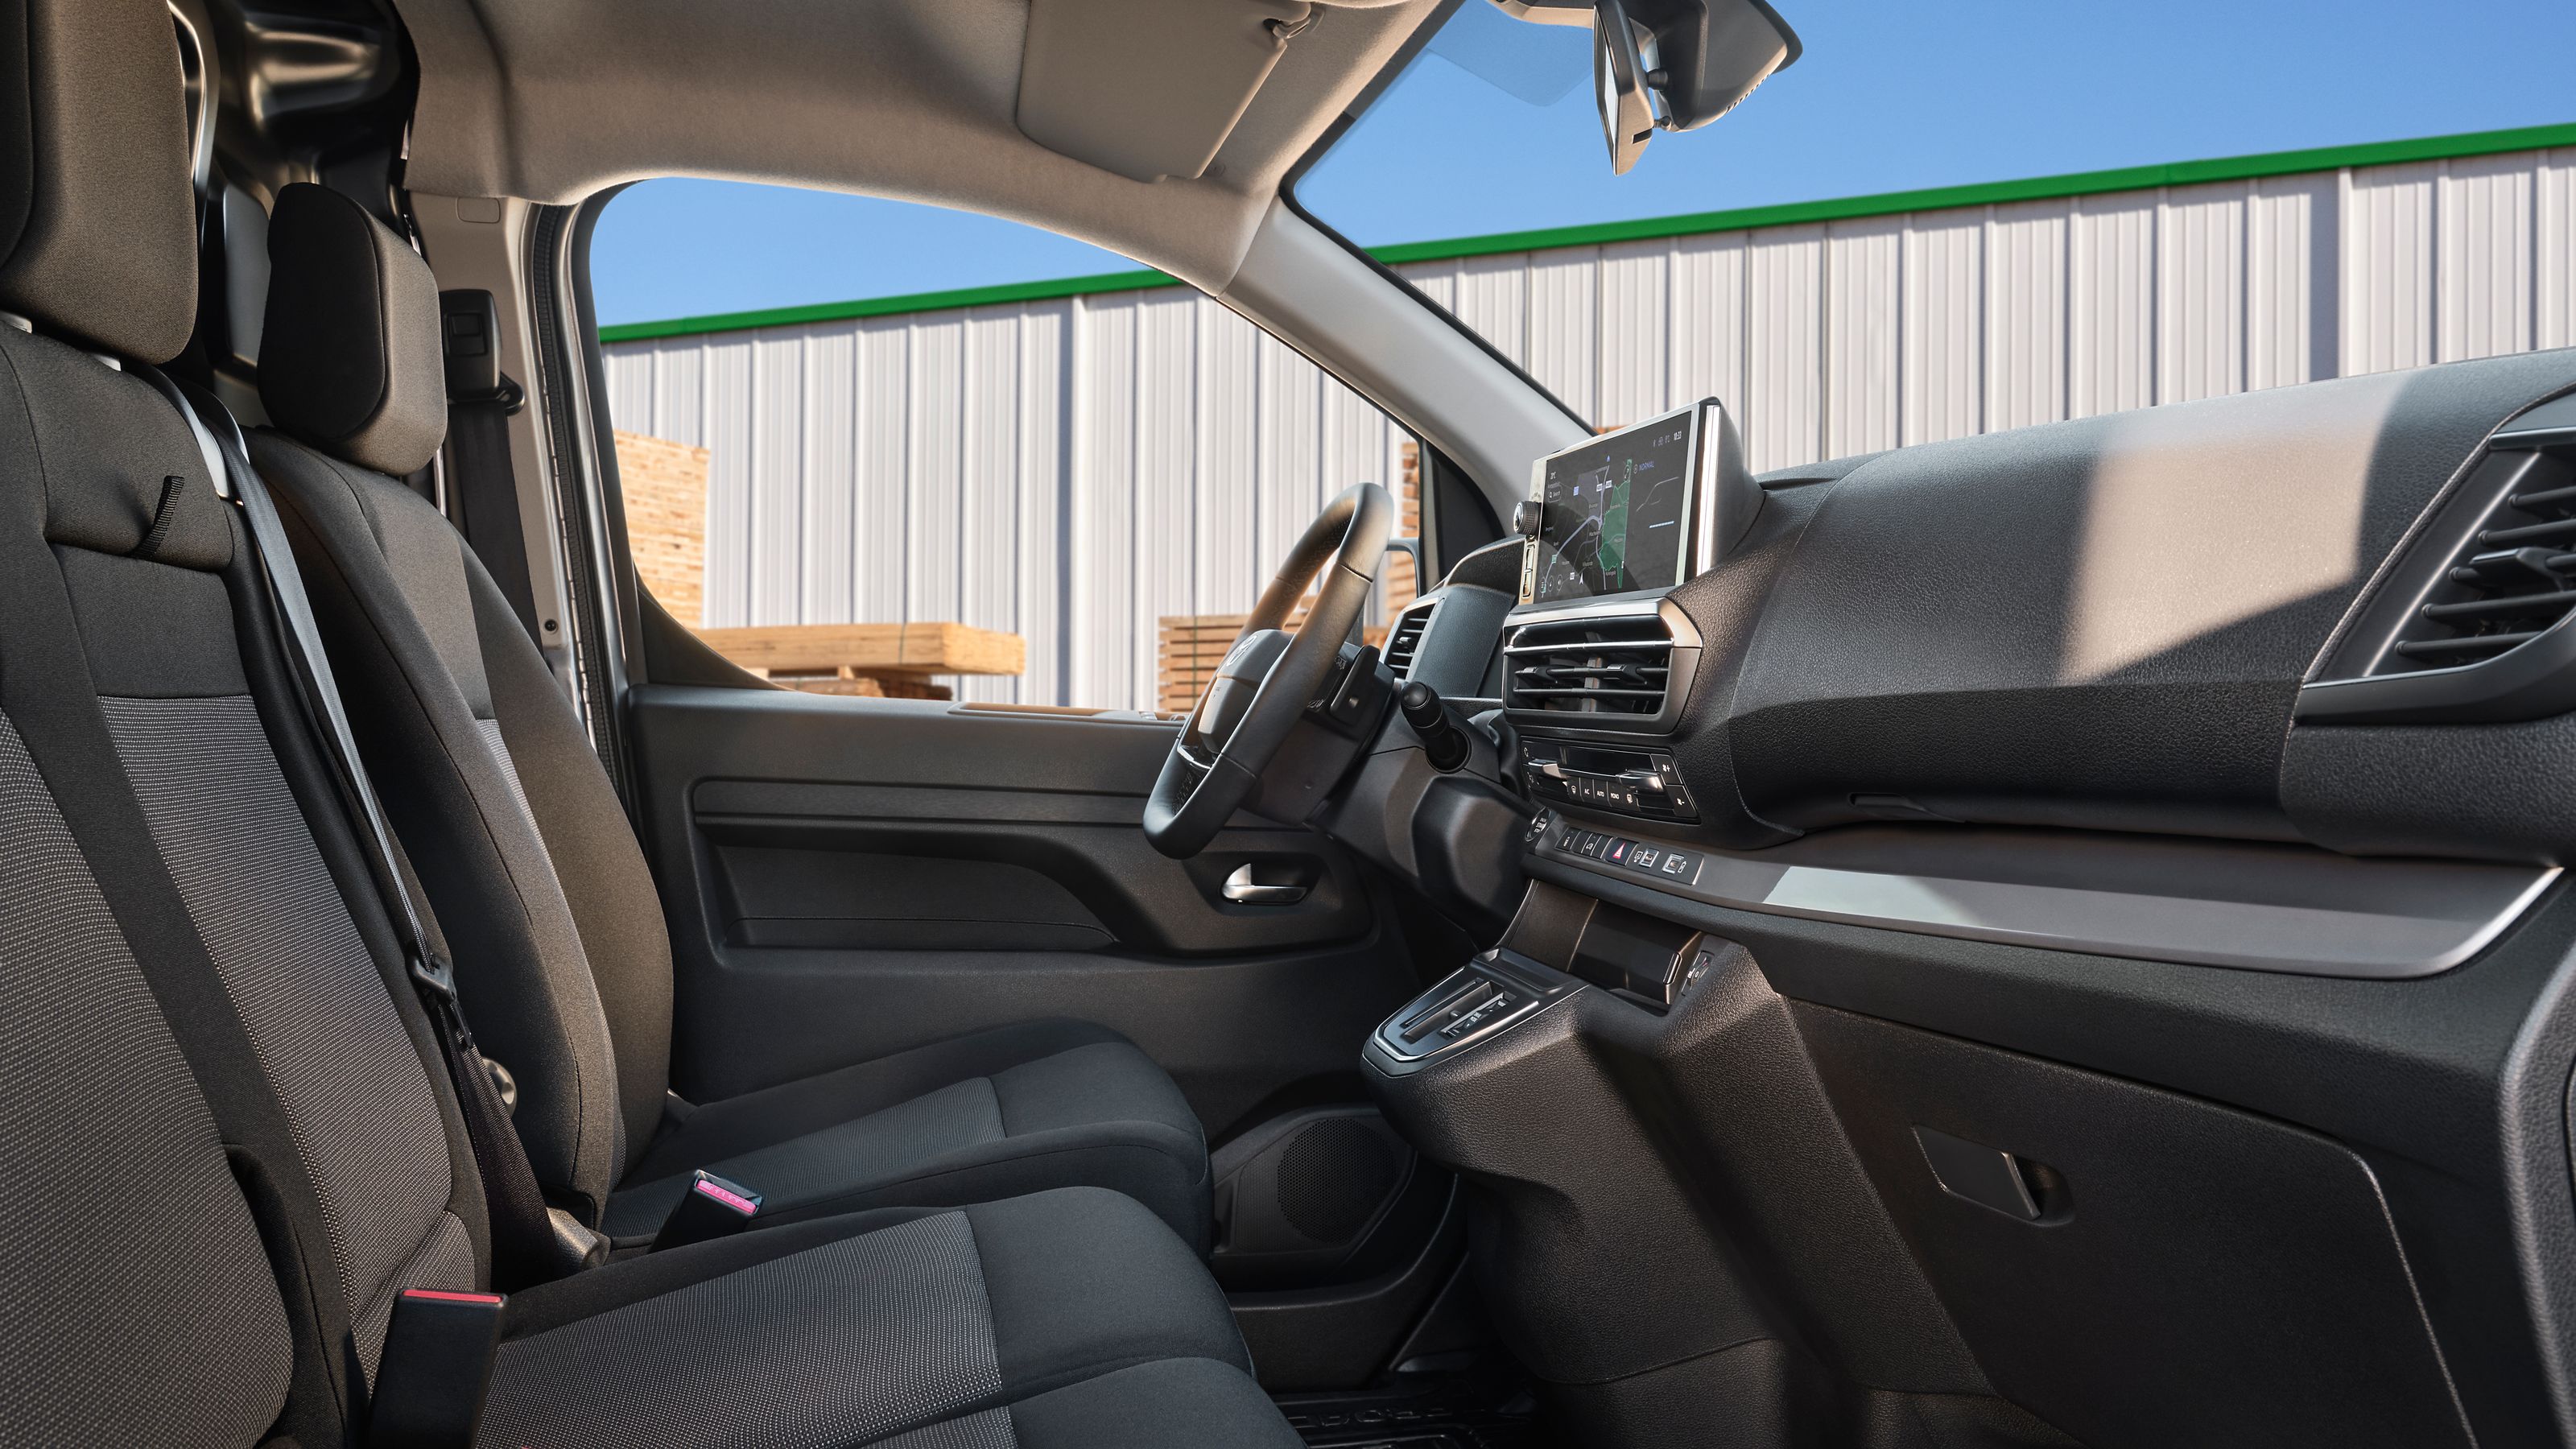 The Proace’s roomy and flexible interior 